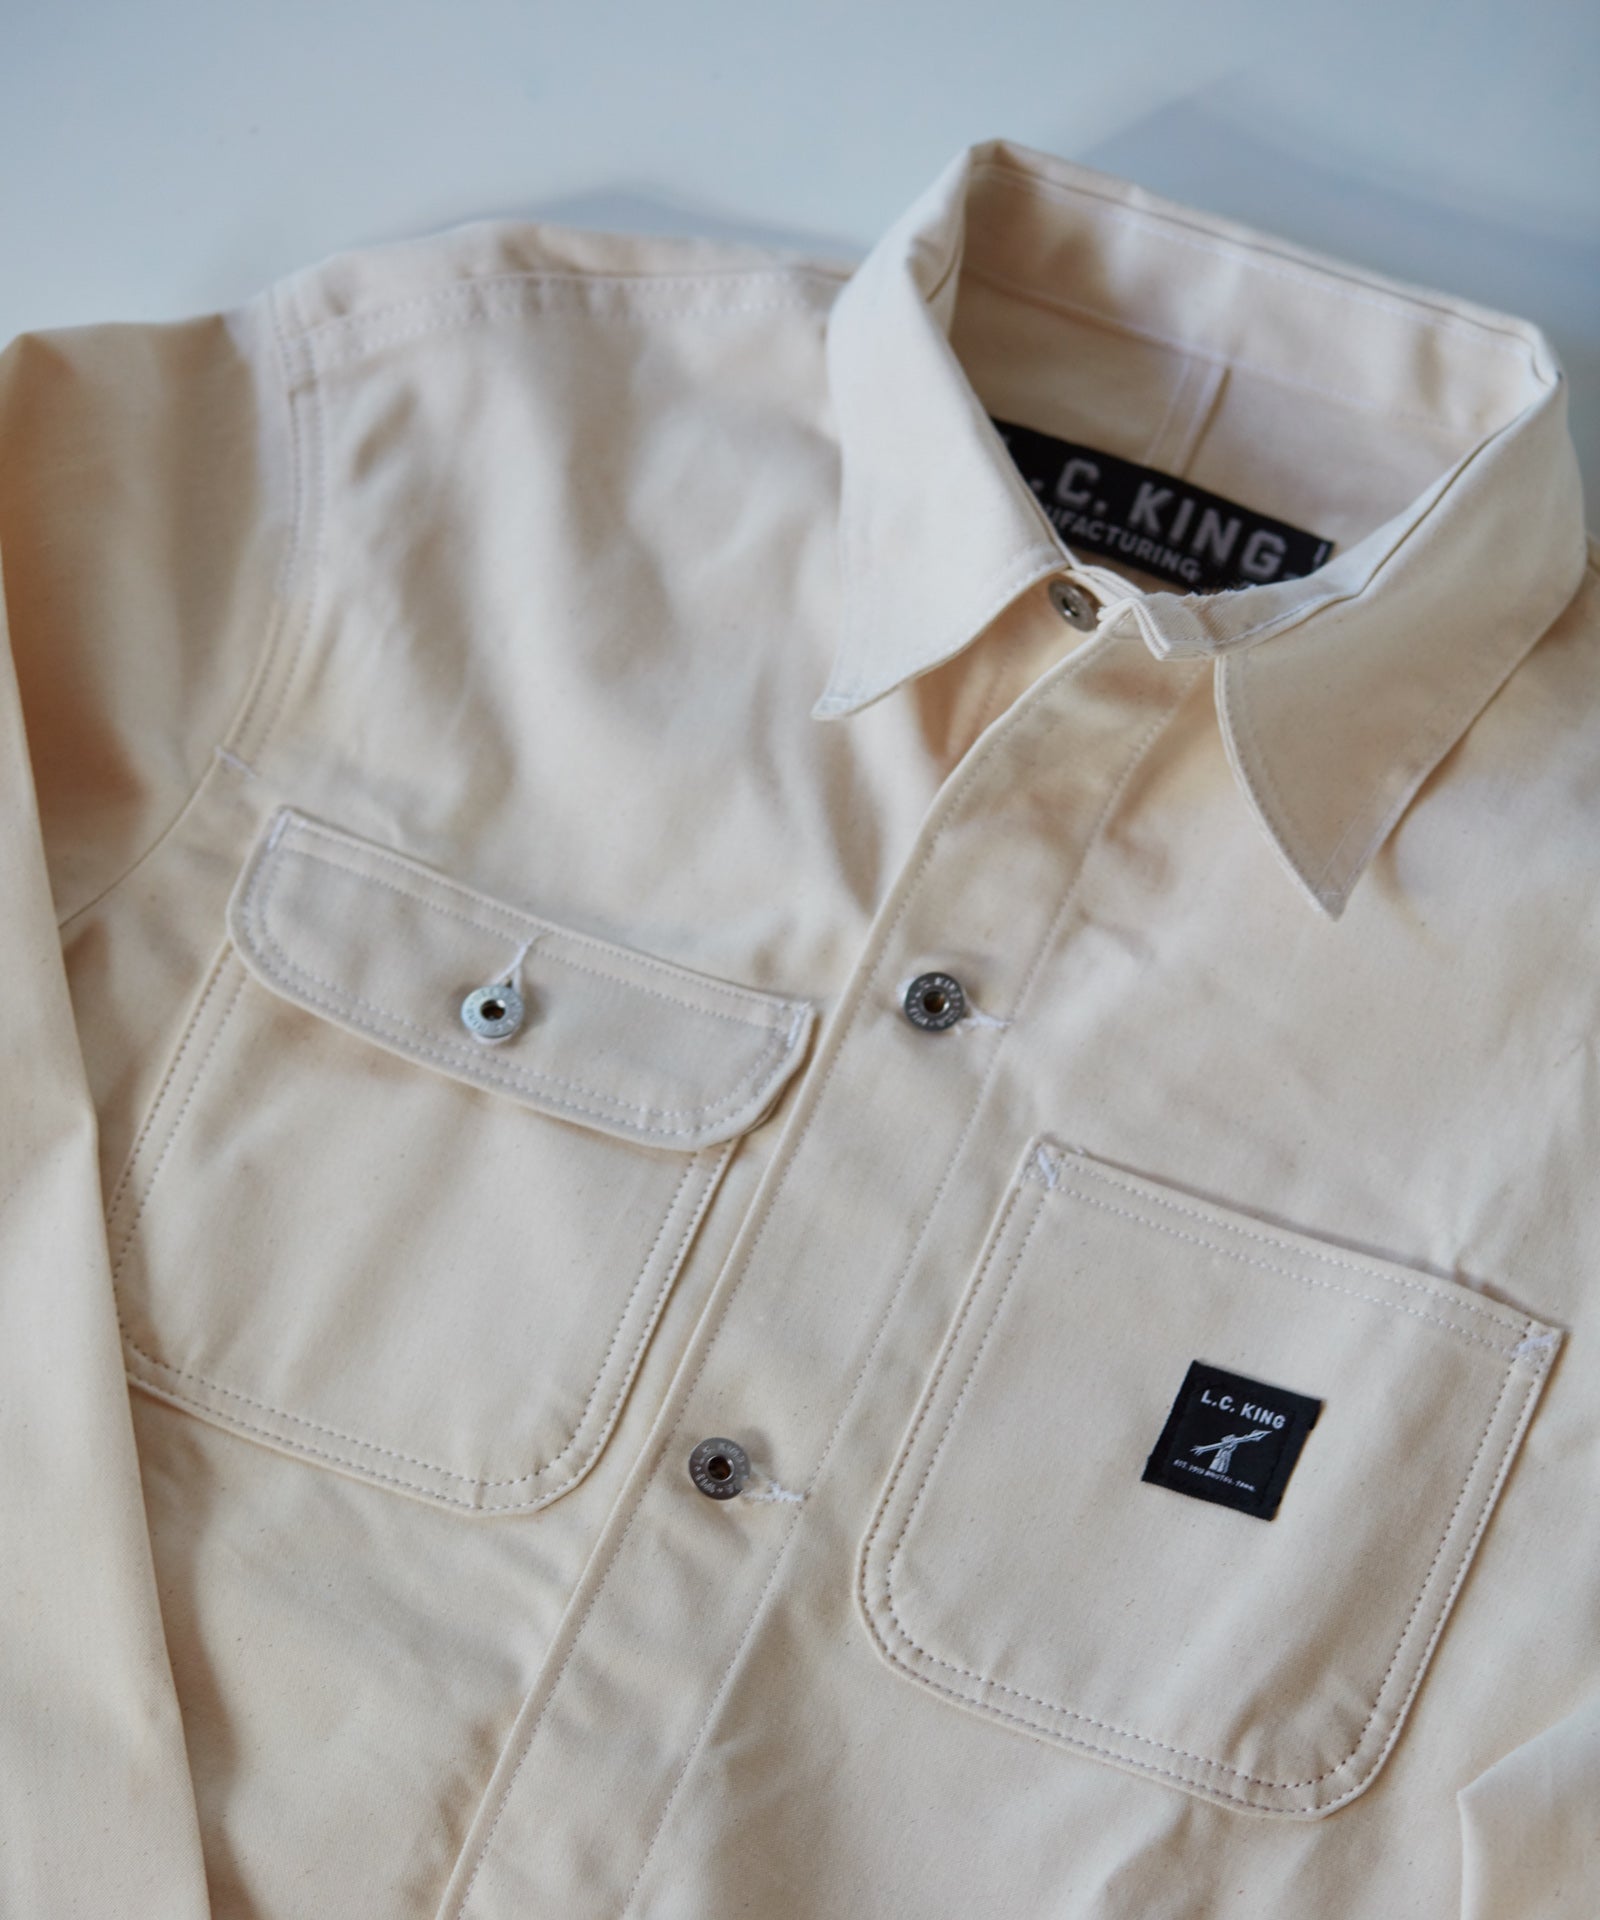 L.C King canvas chore jacket. Men's small. See ALL photos!